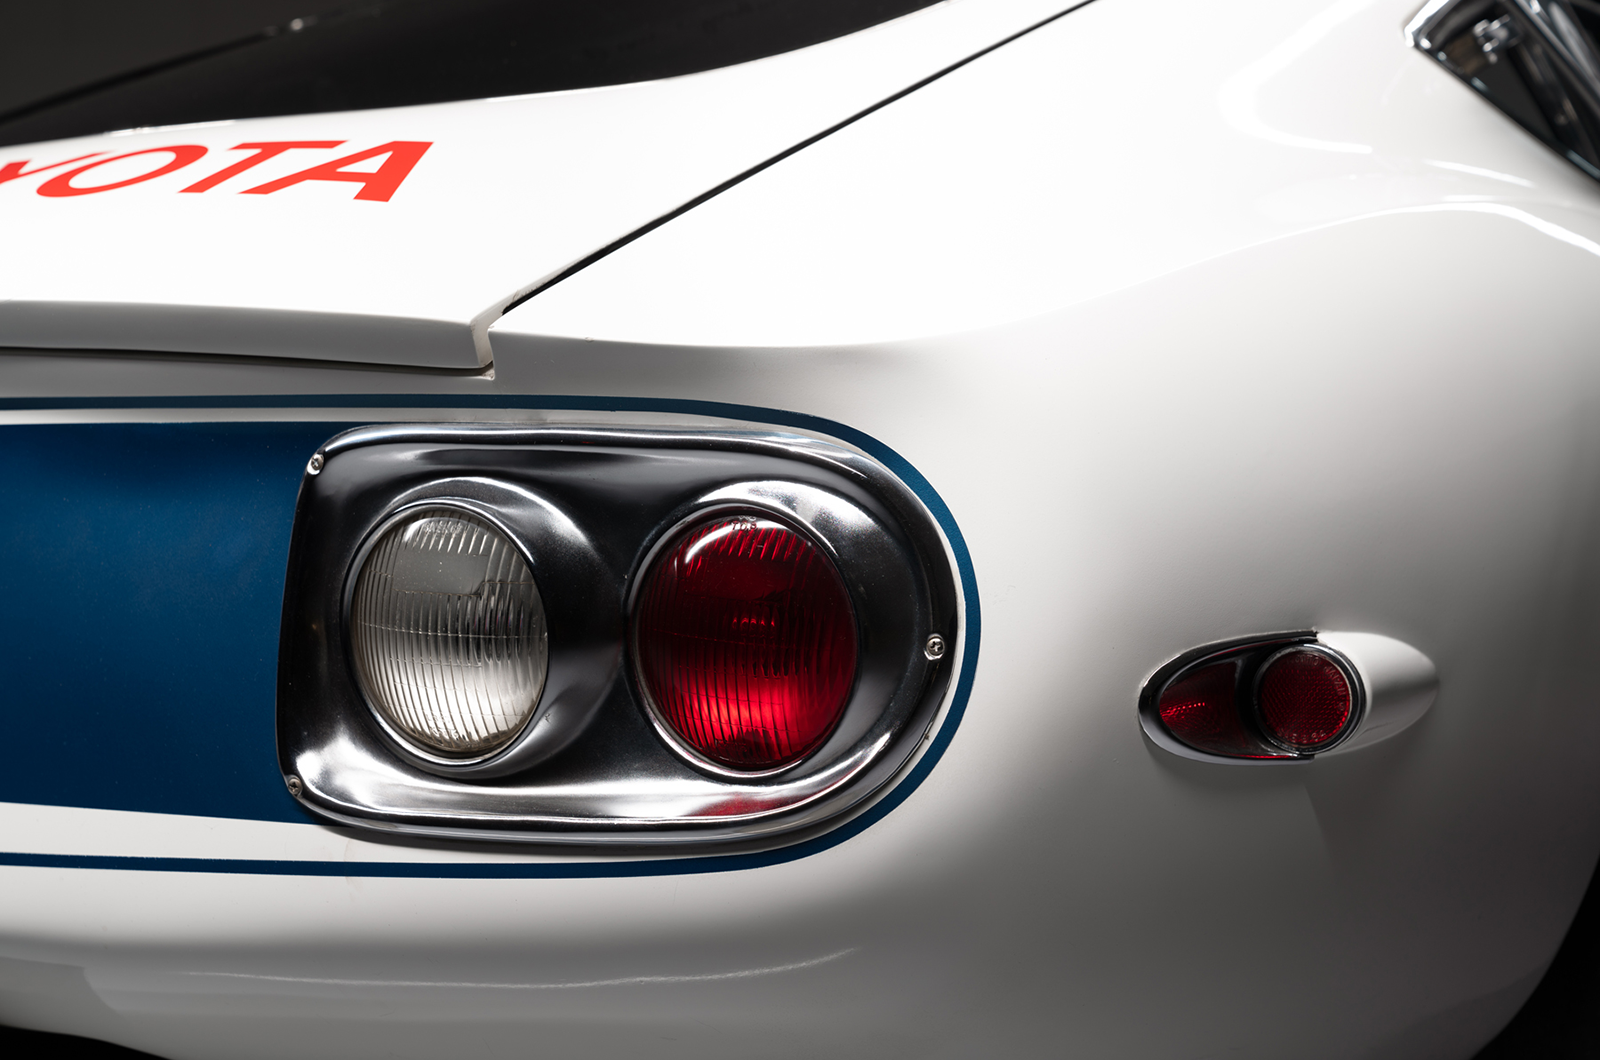 Classic & Sports Car – Toyota-Shelby 2000GT makes history at Amelia Island